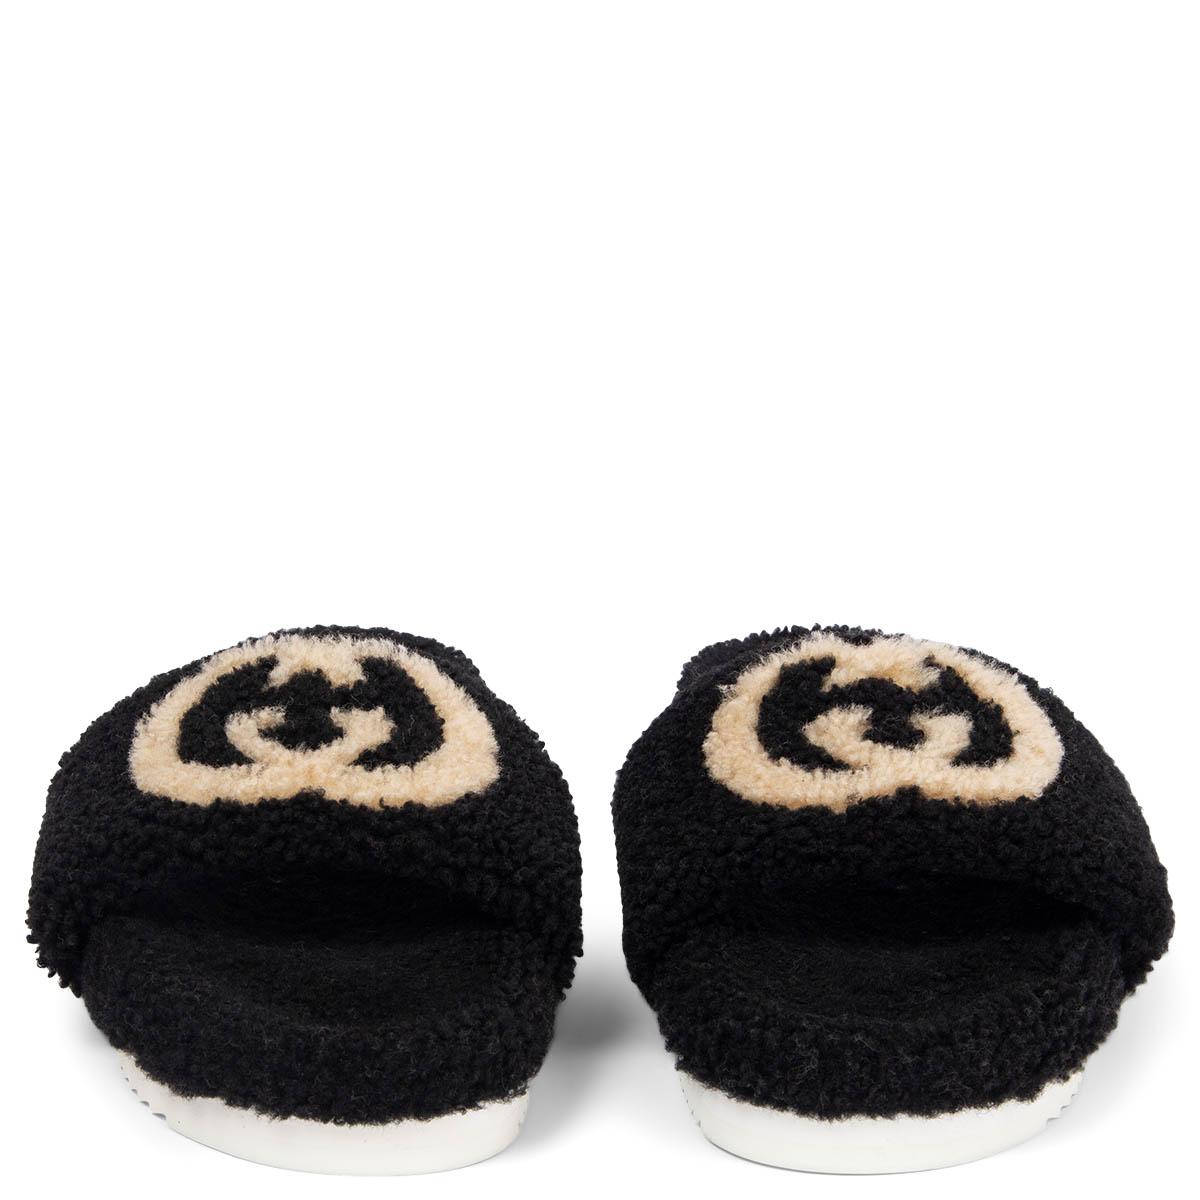 100% authentic Gucci Eileen Teddy Shearling slides in black with Interlocking GG logo set on white rubber soles. Have been worn and are in excellent condition. Come with dust bag. 

Measurements
Imprinted Size	41
Shoe Size	41
Inside Sole	26cm